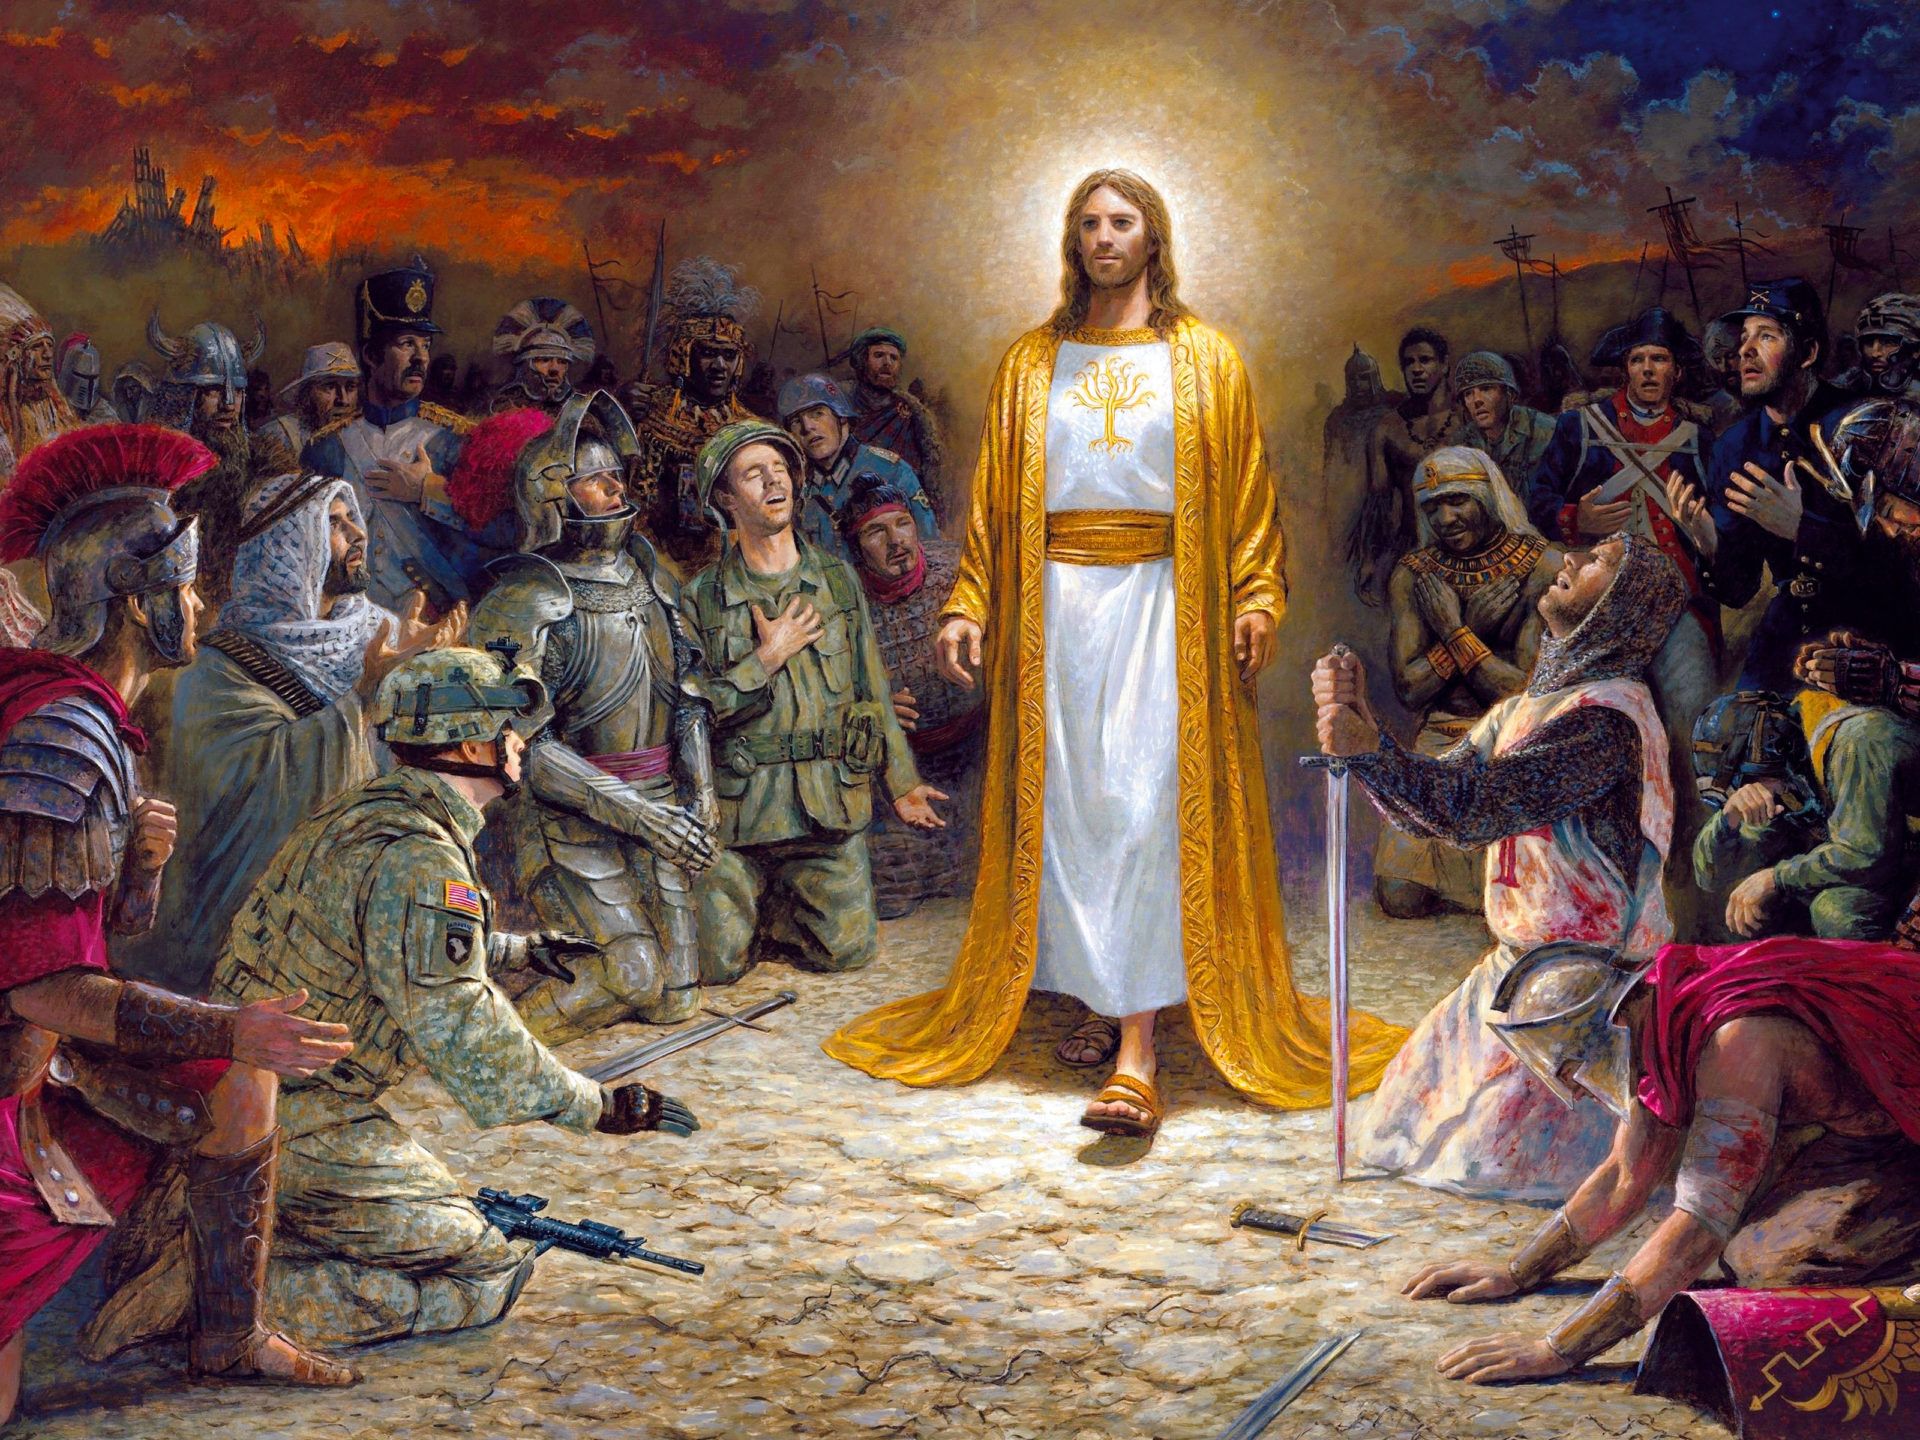 Jesus Christ Soldiers Praying Before The Lord For The Sins Committed 4k Ultra HD Desktop Wallpaper For Computers Laptop Tablet And Mobile Phones 3840x2400, Wallpaper13.com